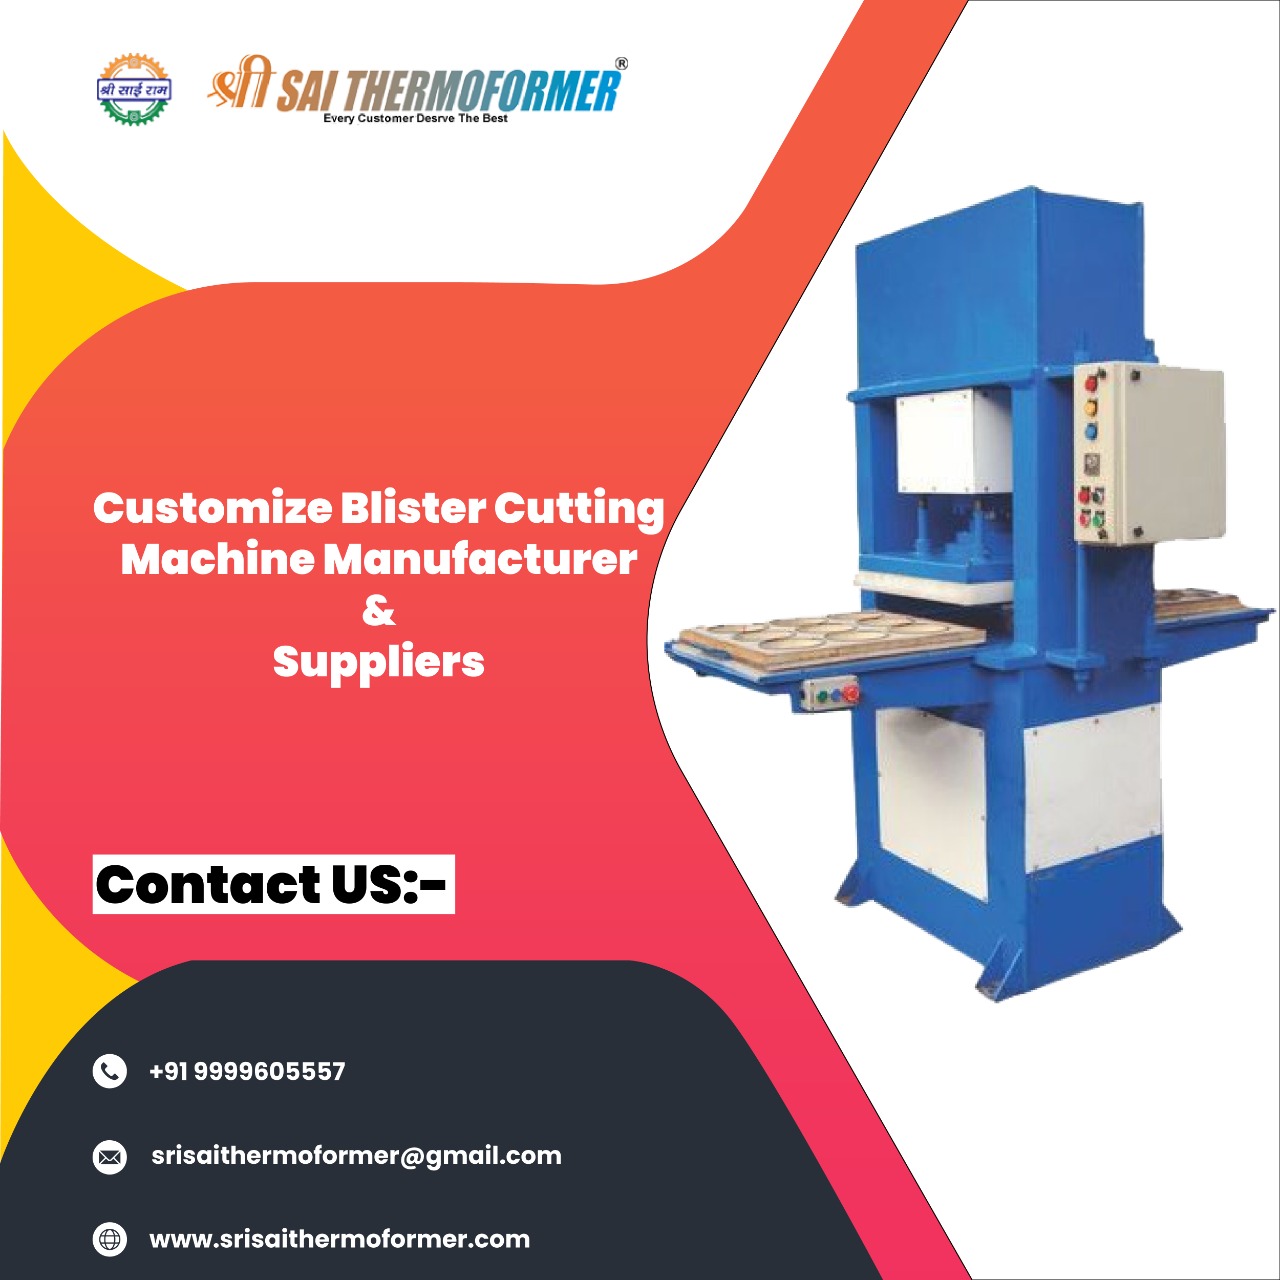 Looking For a Customized Blister Cutting Machine, Contact Us SriSaiThermoformer